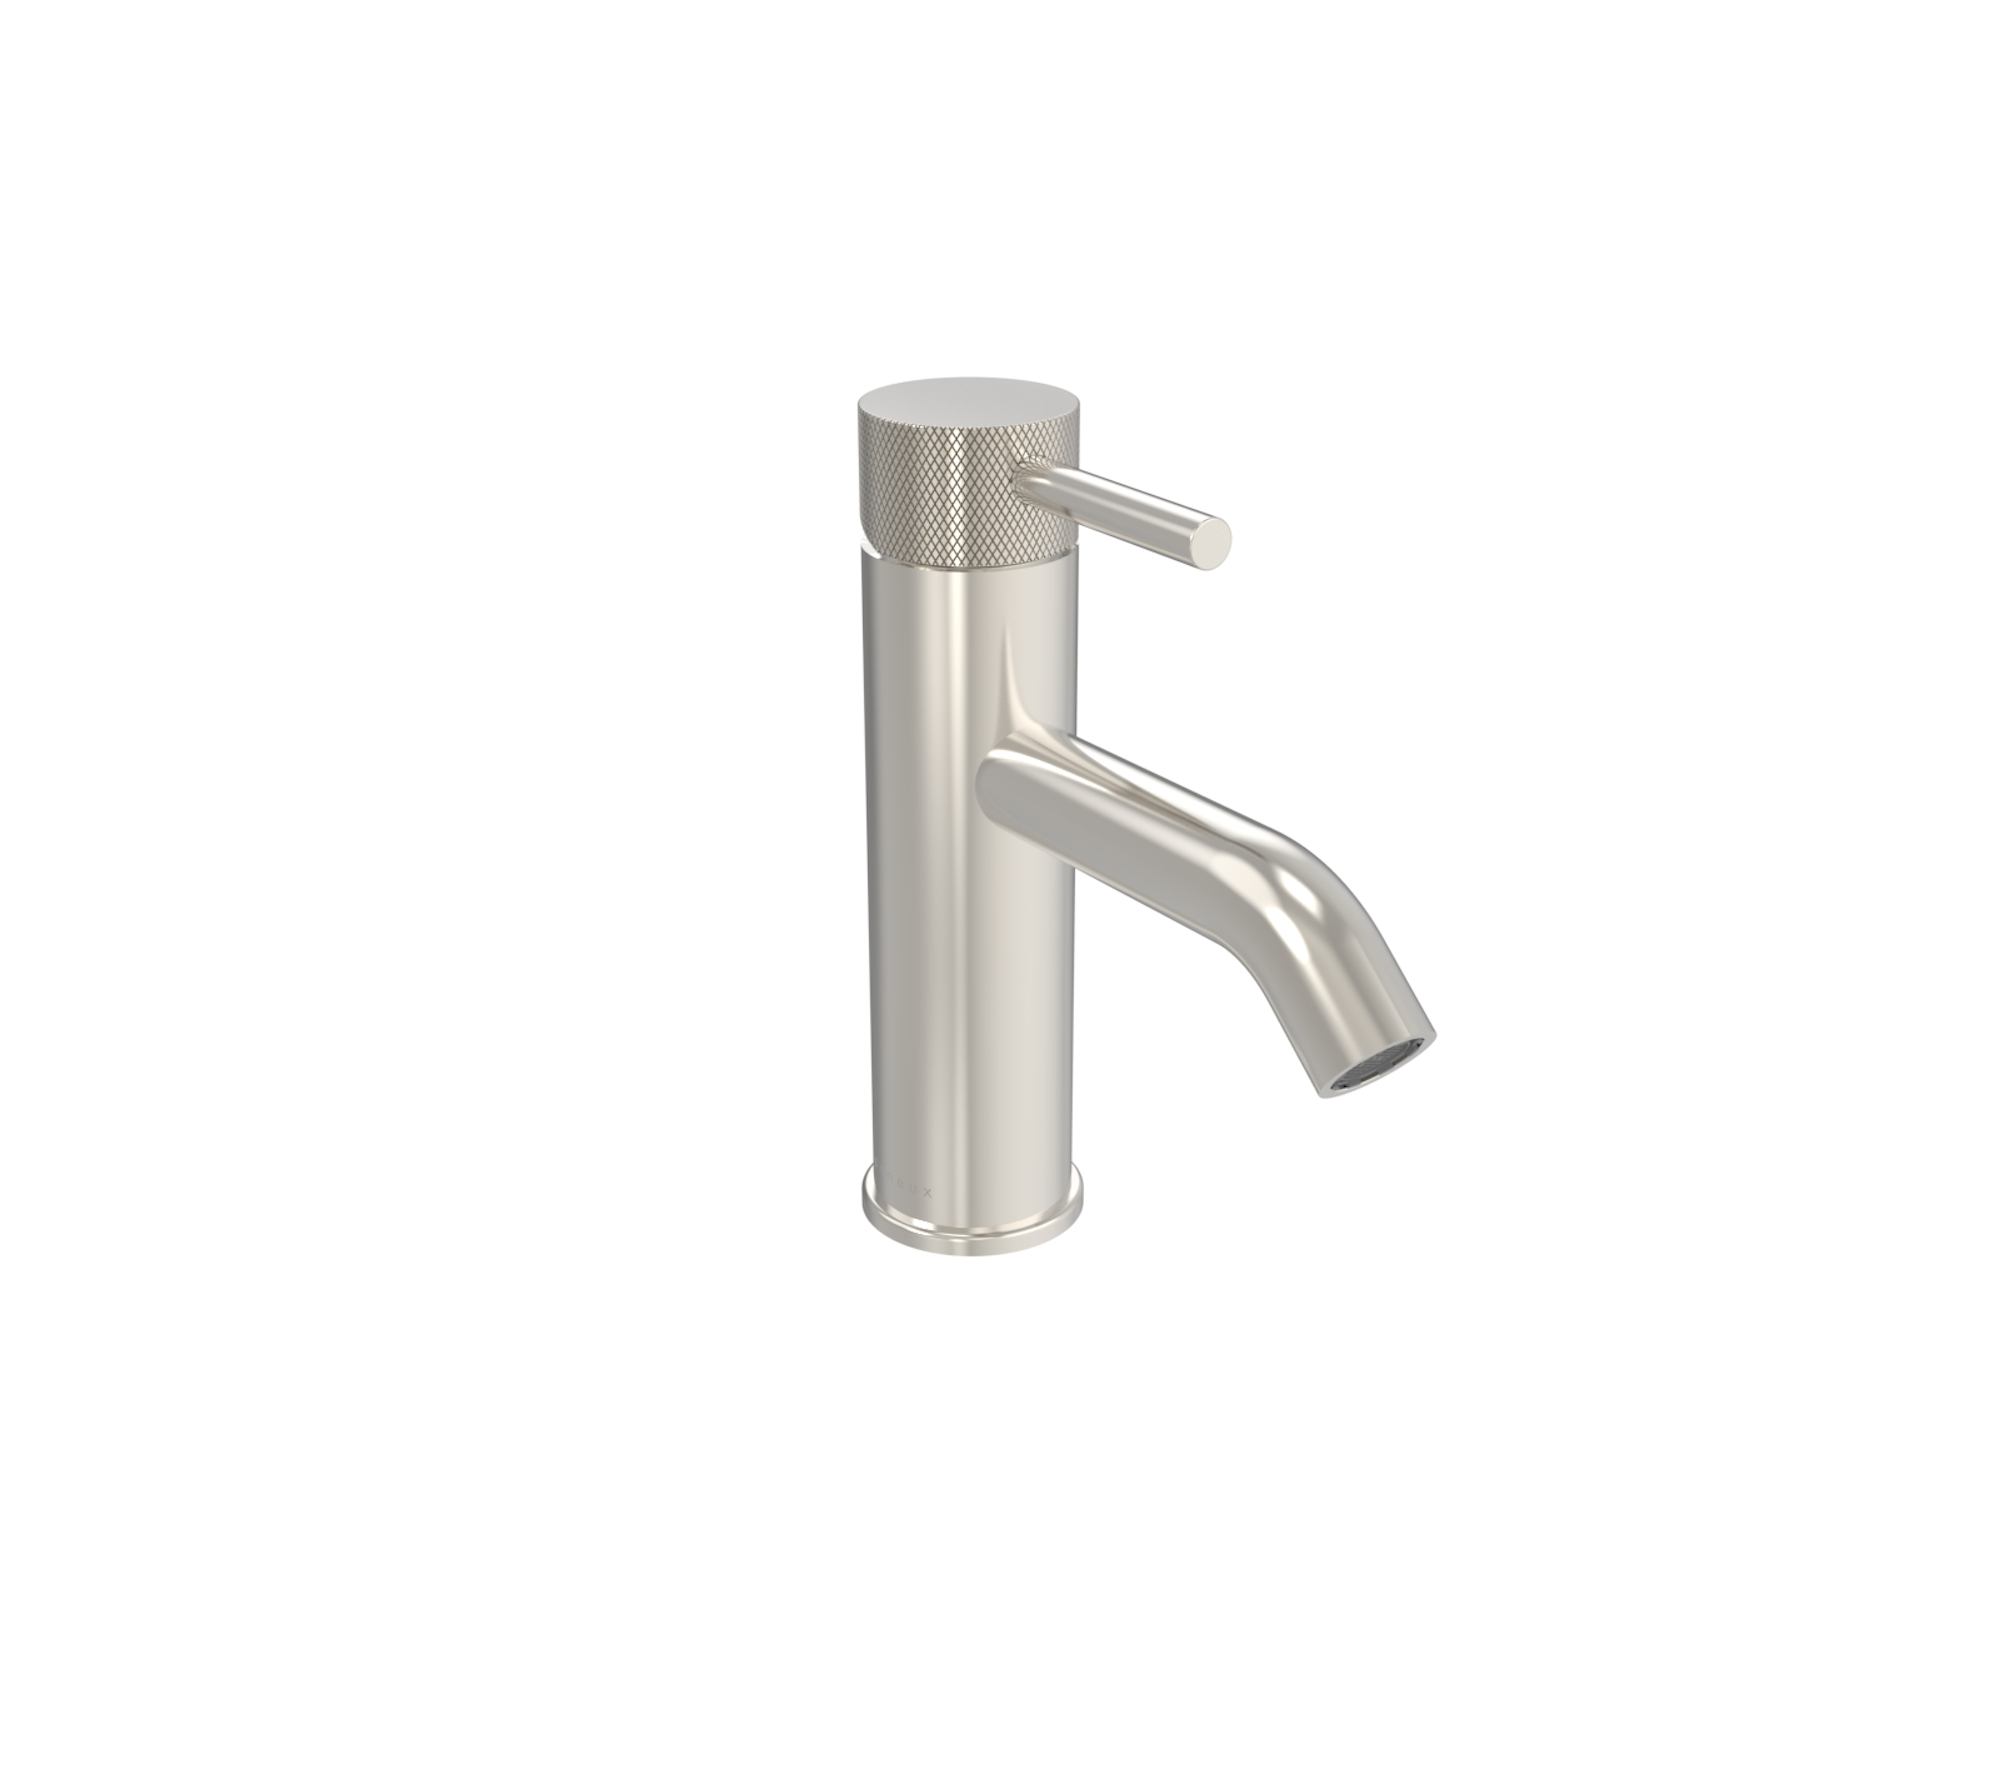 COS basin mixer with knurled handle - Brushed Nickel